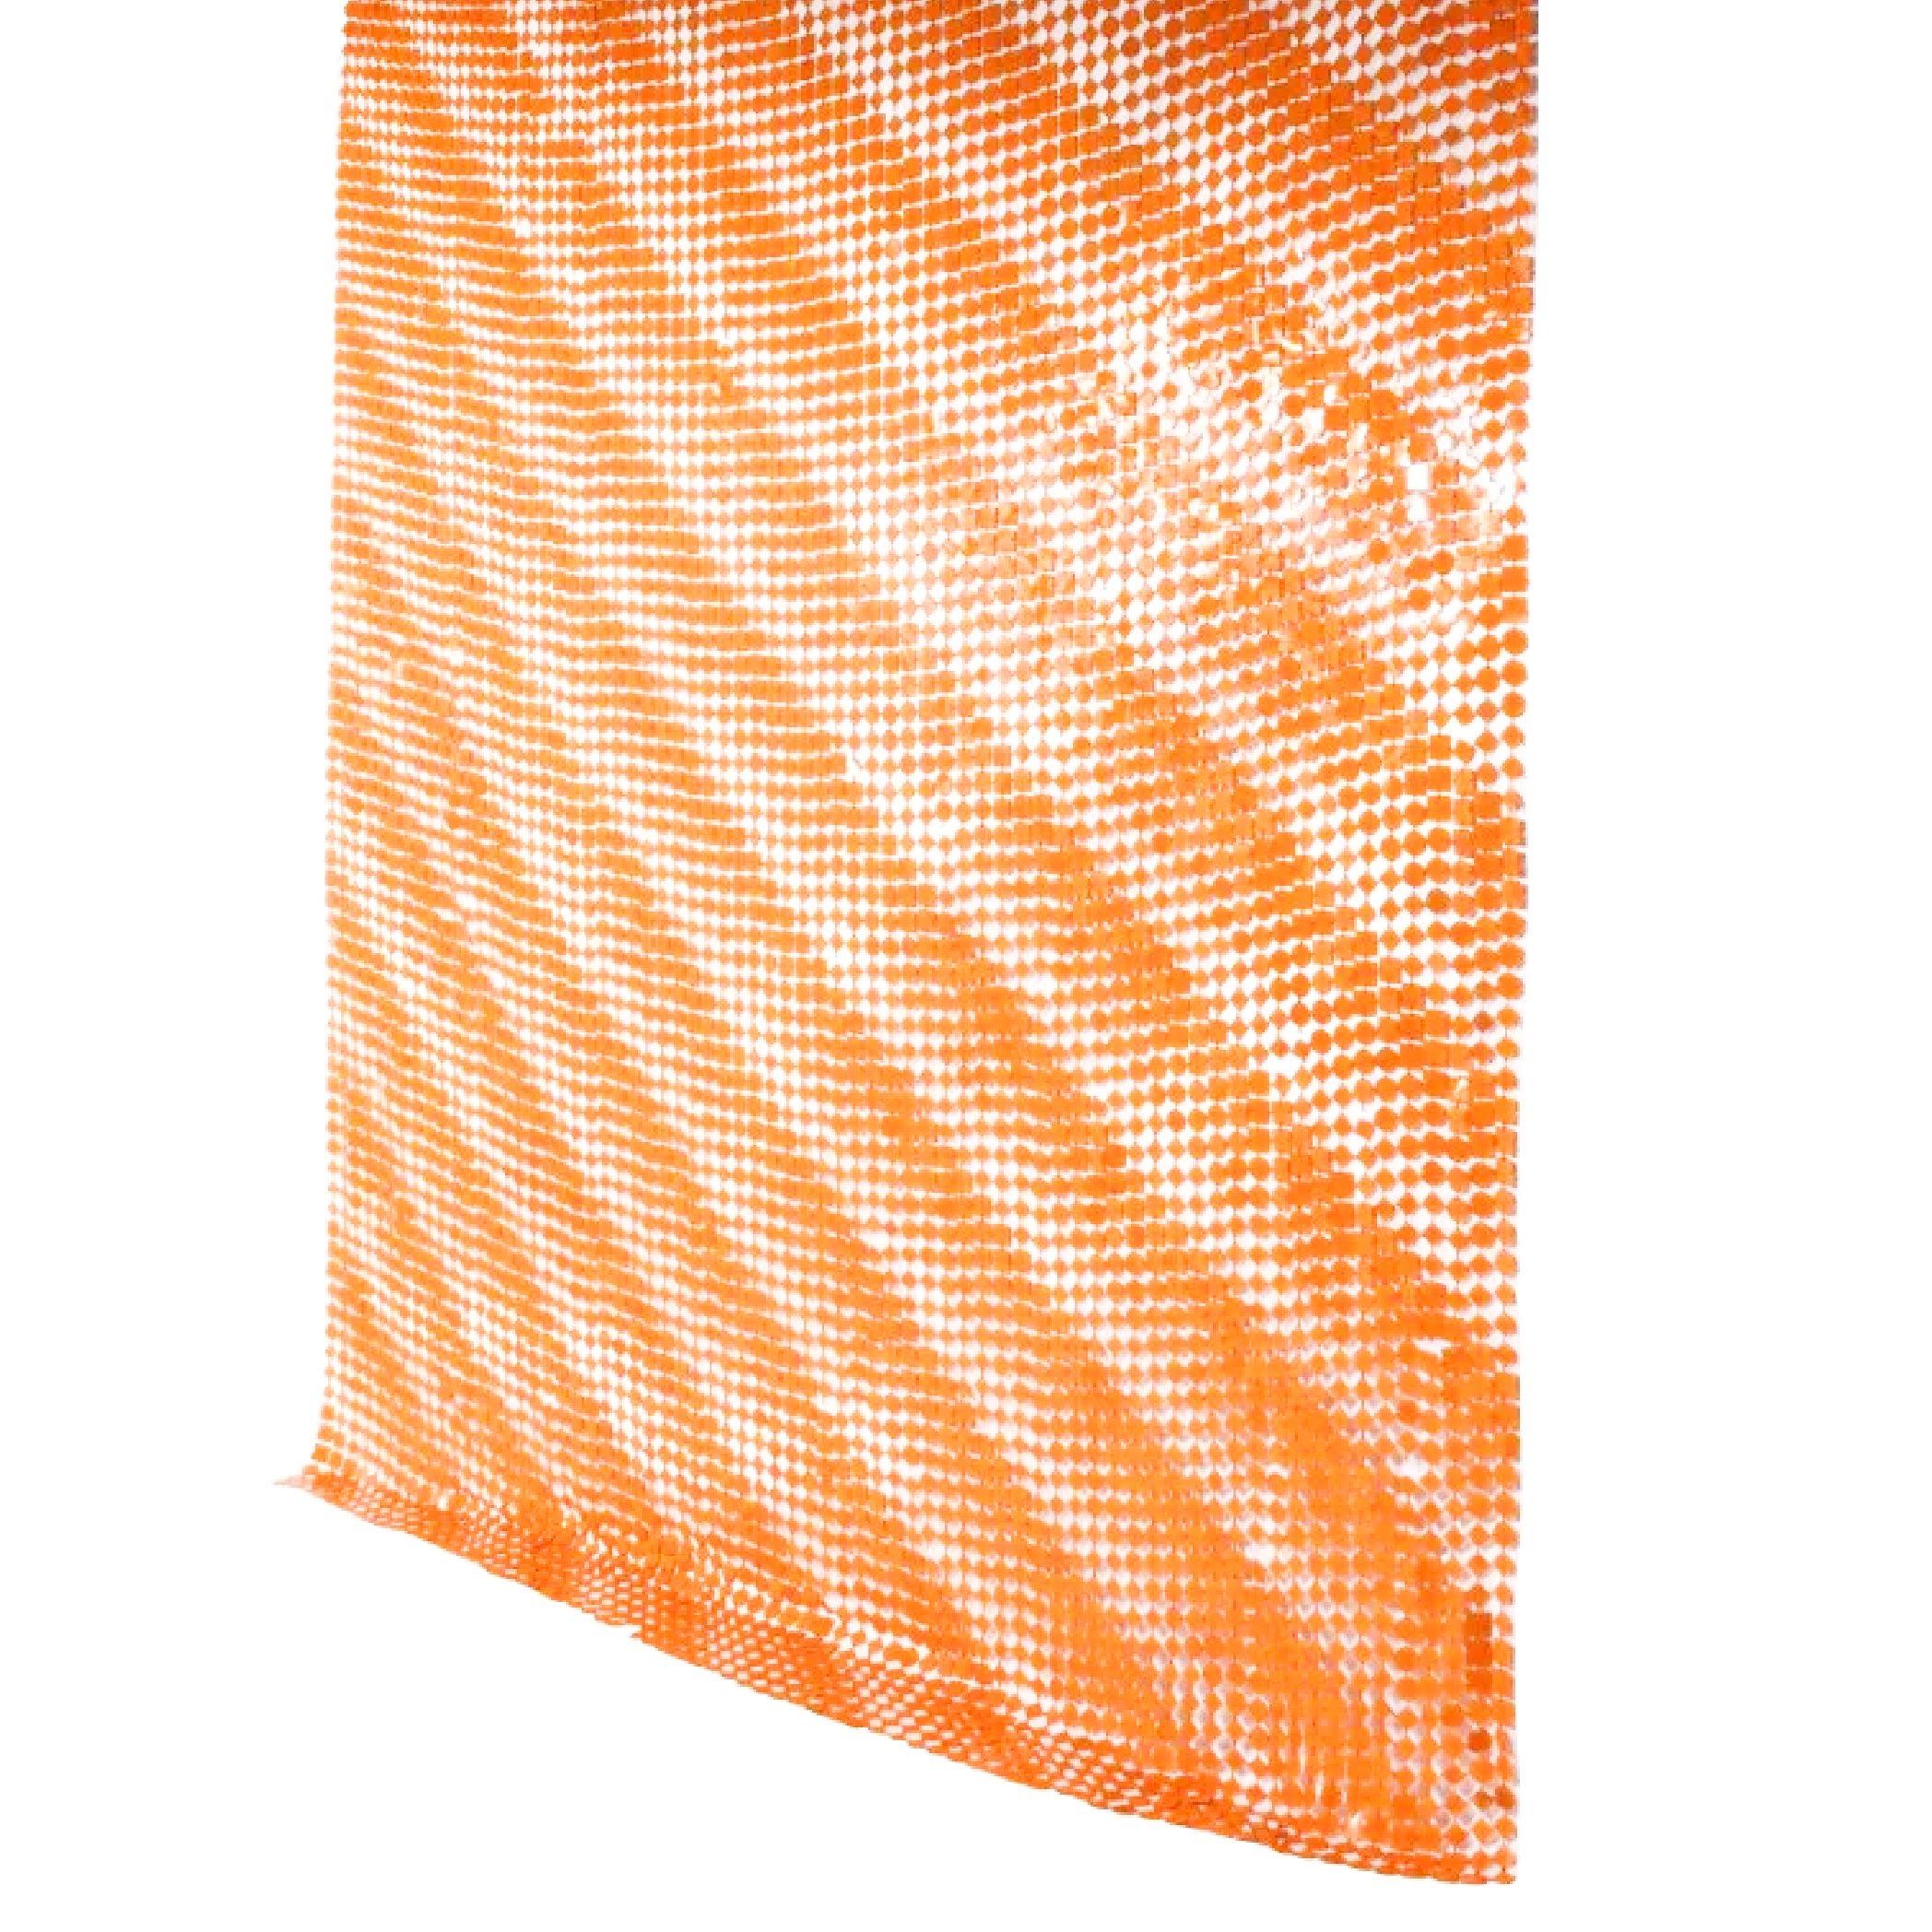 Monumental custom space curtain, Paco Rabanne for Baumann AG, Switzerland, 1960s. 107” x 91”. Gorgeous glittery orange metal geometric curtain/room divider by Paco Rabanne. Made of thin plasticized metal plates (rare version with multiple shapes --